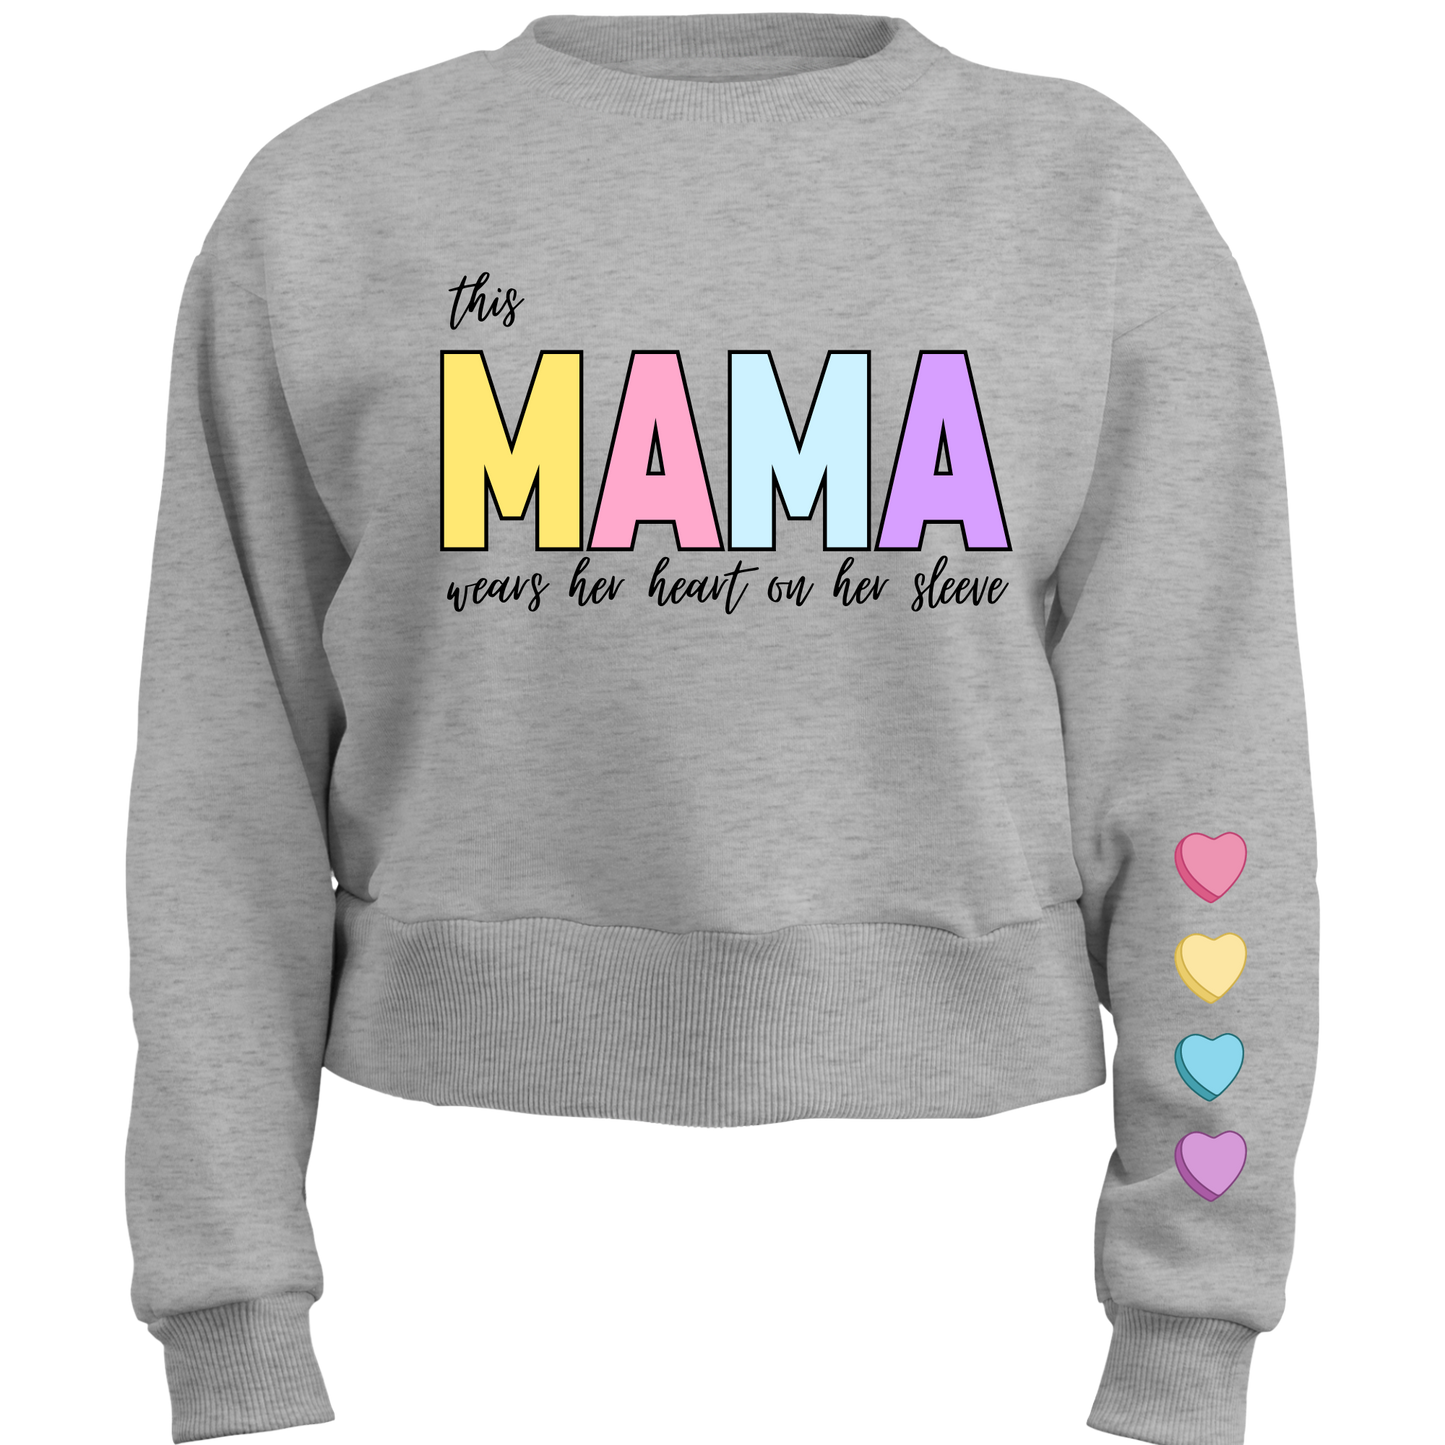 Mama Sweatshirt ADD KIDS NAMES TO THE NOTES OF THE ORDER FOR THE HEARTS ON THE SLEEVE